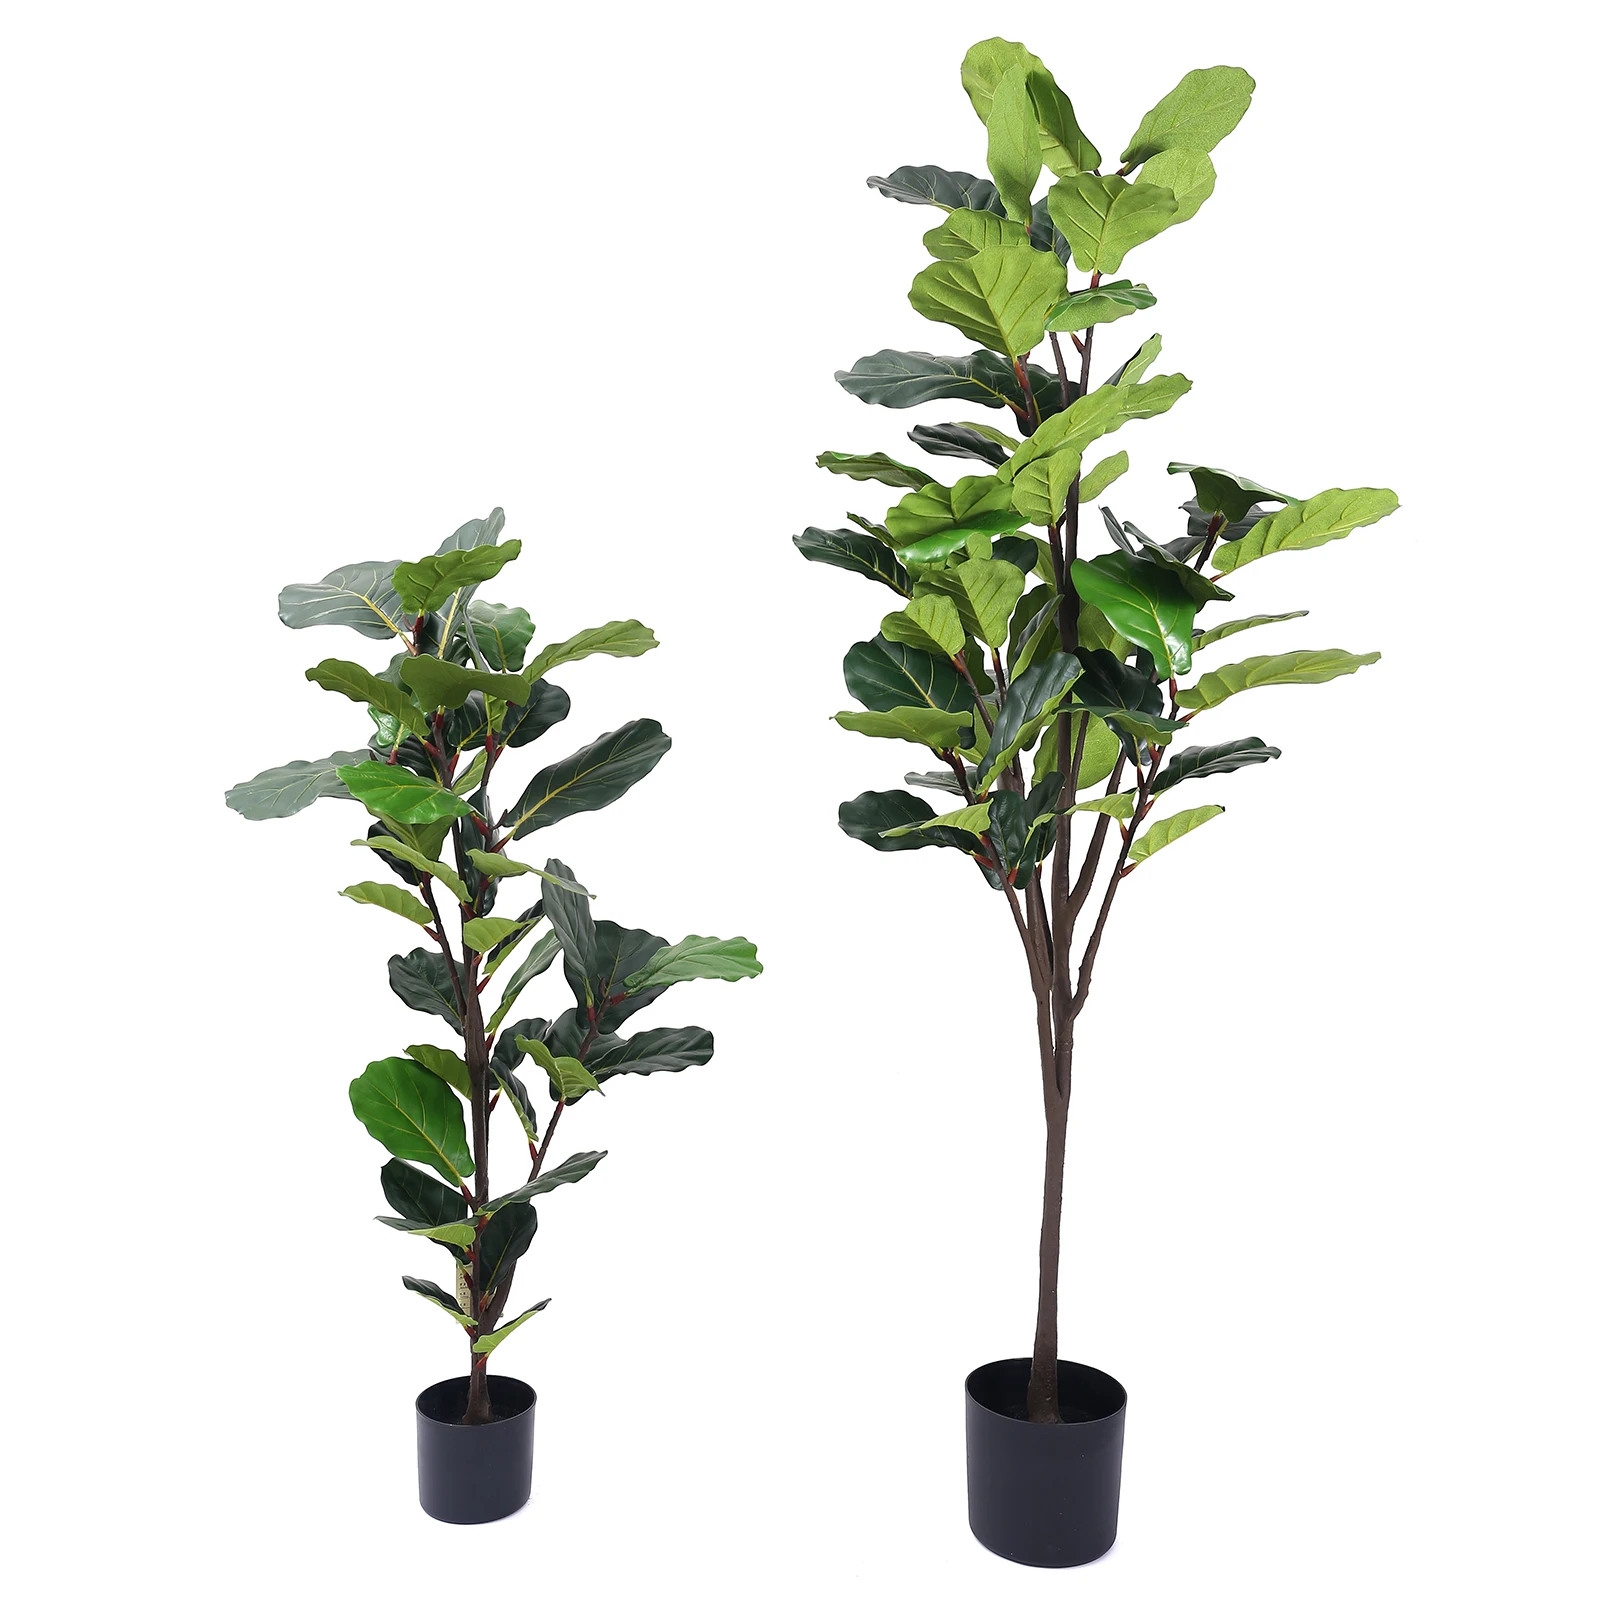 

Wholesale Faux Plastic Plant Tree 125cm Artificial Fiddle Leaf Fig Tree in Pot for Home Office Decor, Shown